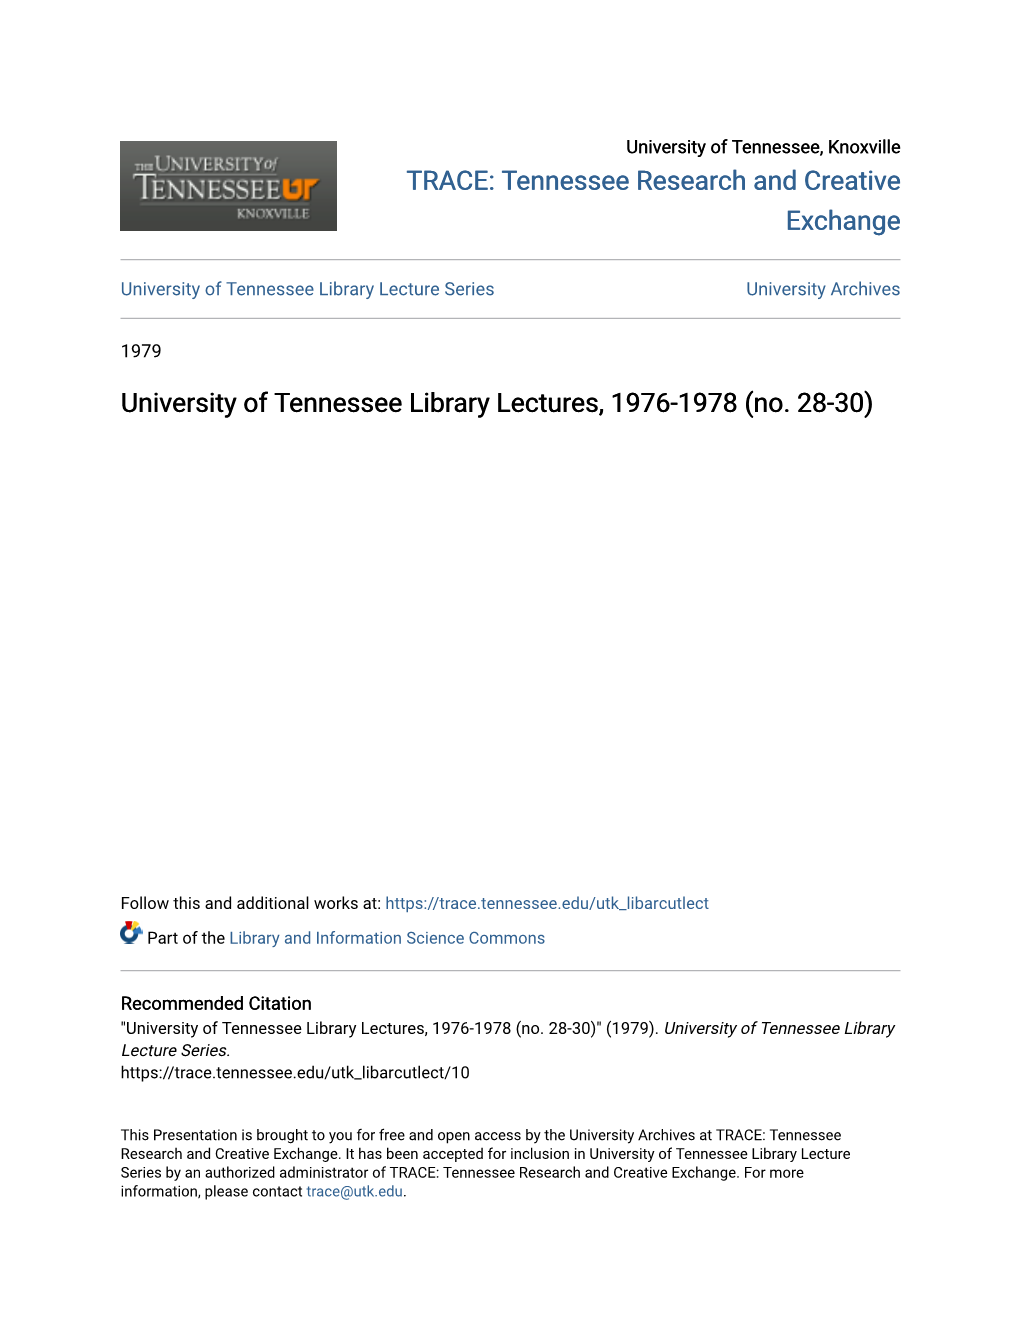 University of Tennessee Library Lectures, 1976-1978 (No. 28-30)